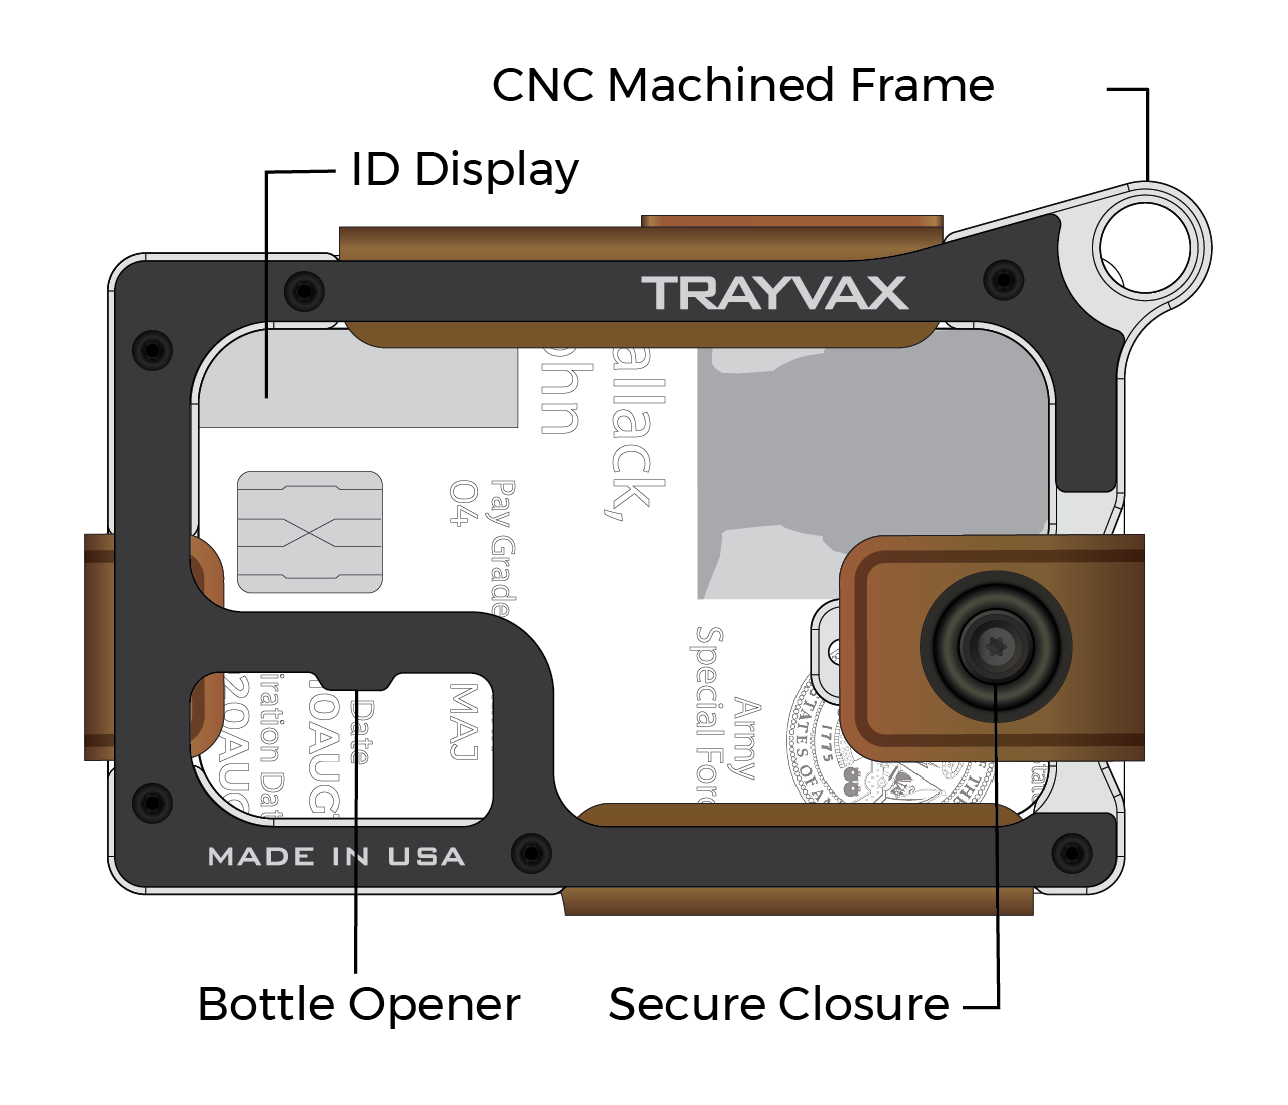 The Trayvax Contour: Rugged & Refined